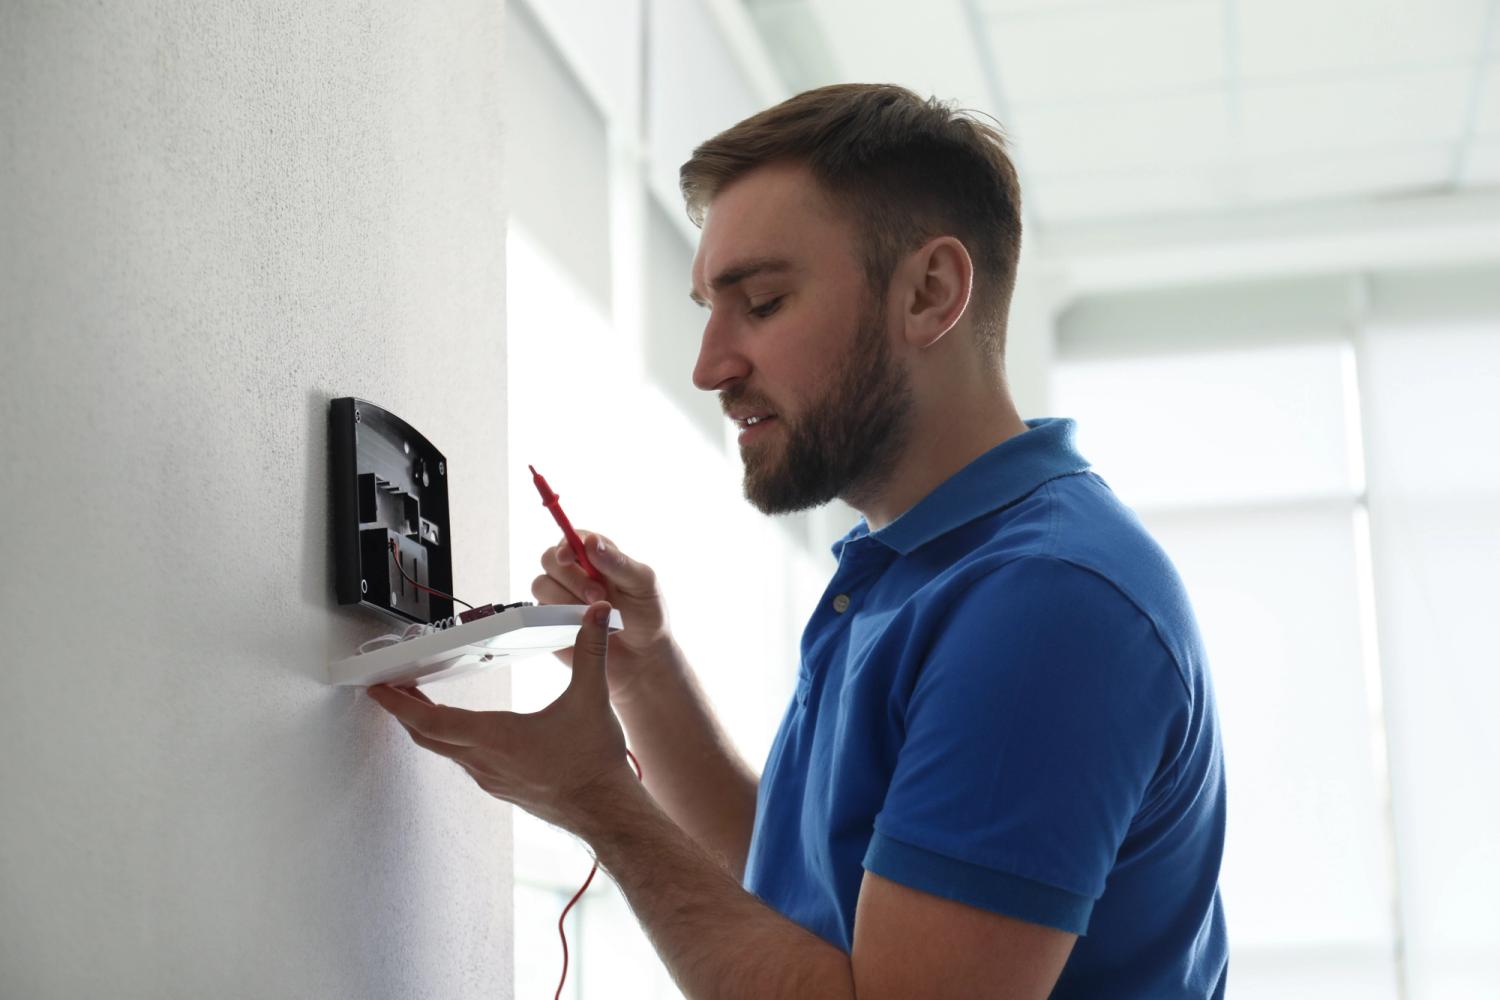 man in blue shirt installing security system